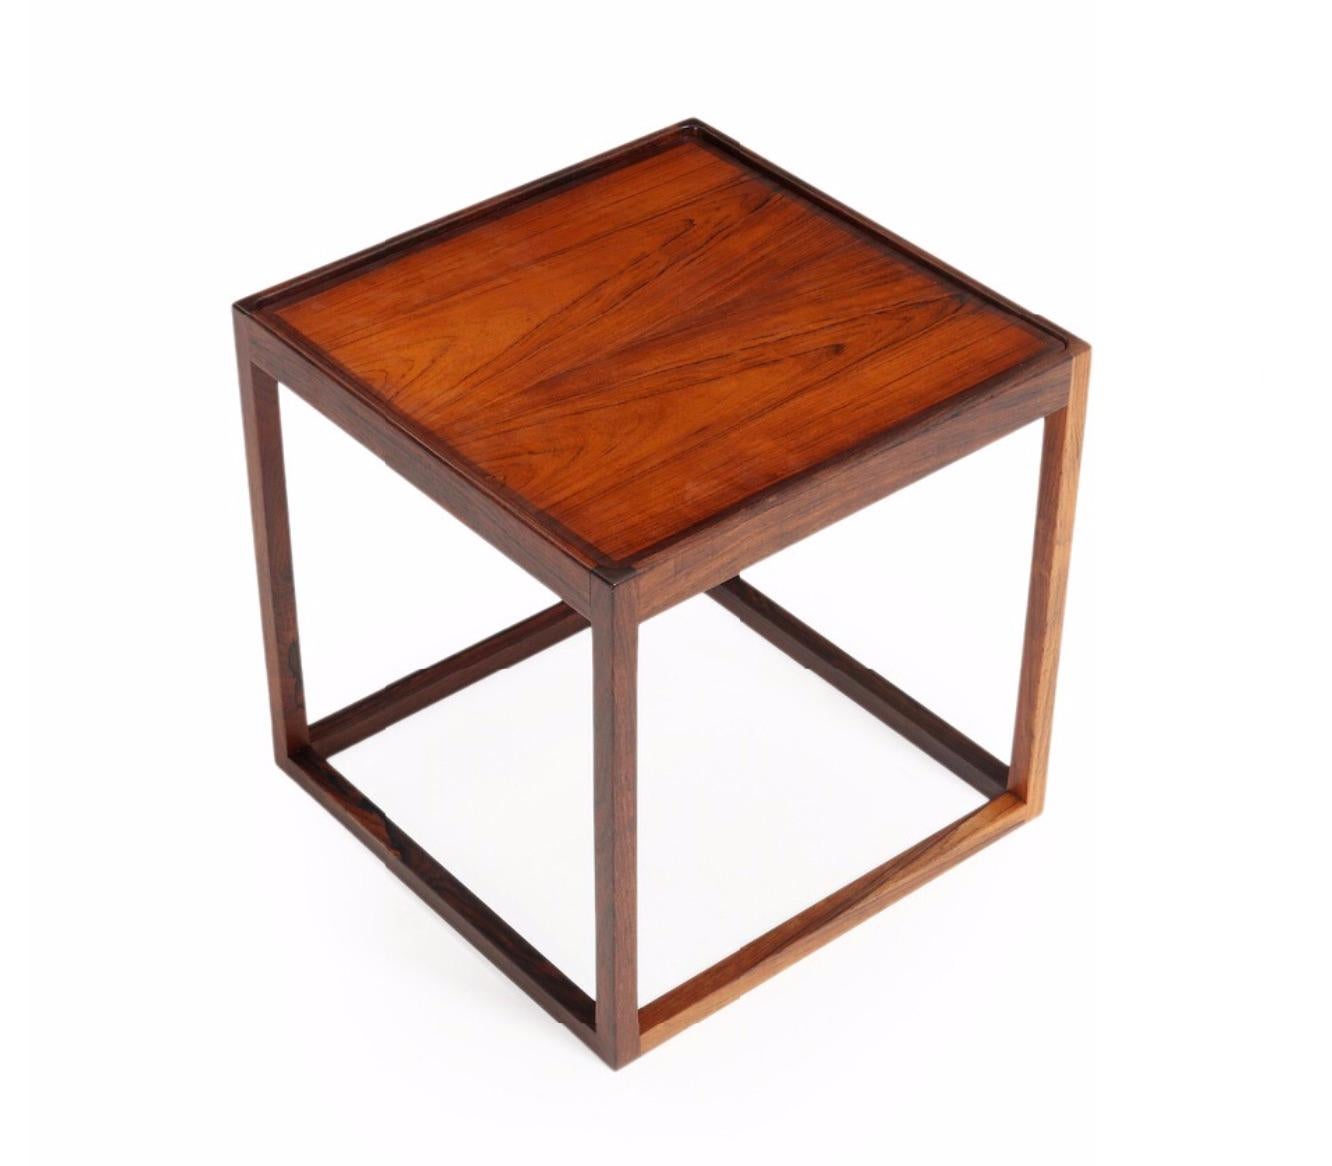 Cube-shaped rosewood side table with reversible top. Manufactured by Jason Møbler, Denmark. Purchased in Denmark. 

Additional images, close-ups and detailed condition report available upon request.


